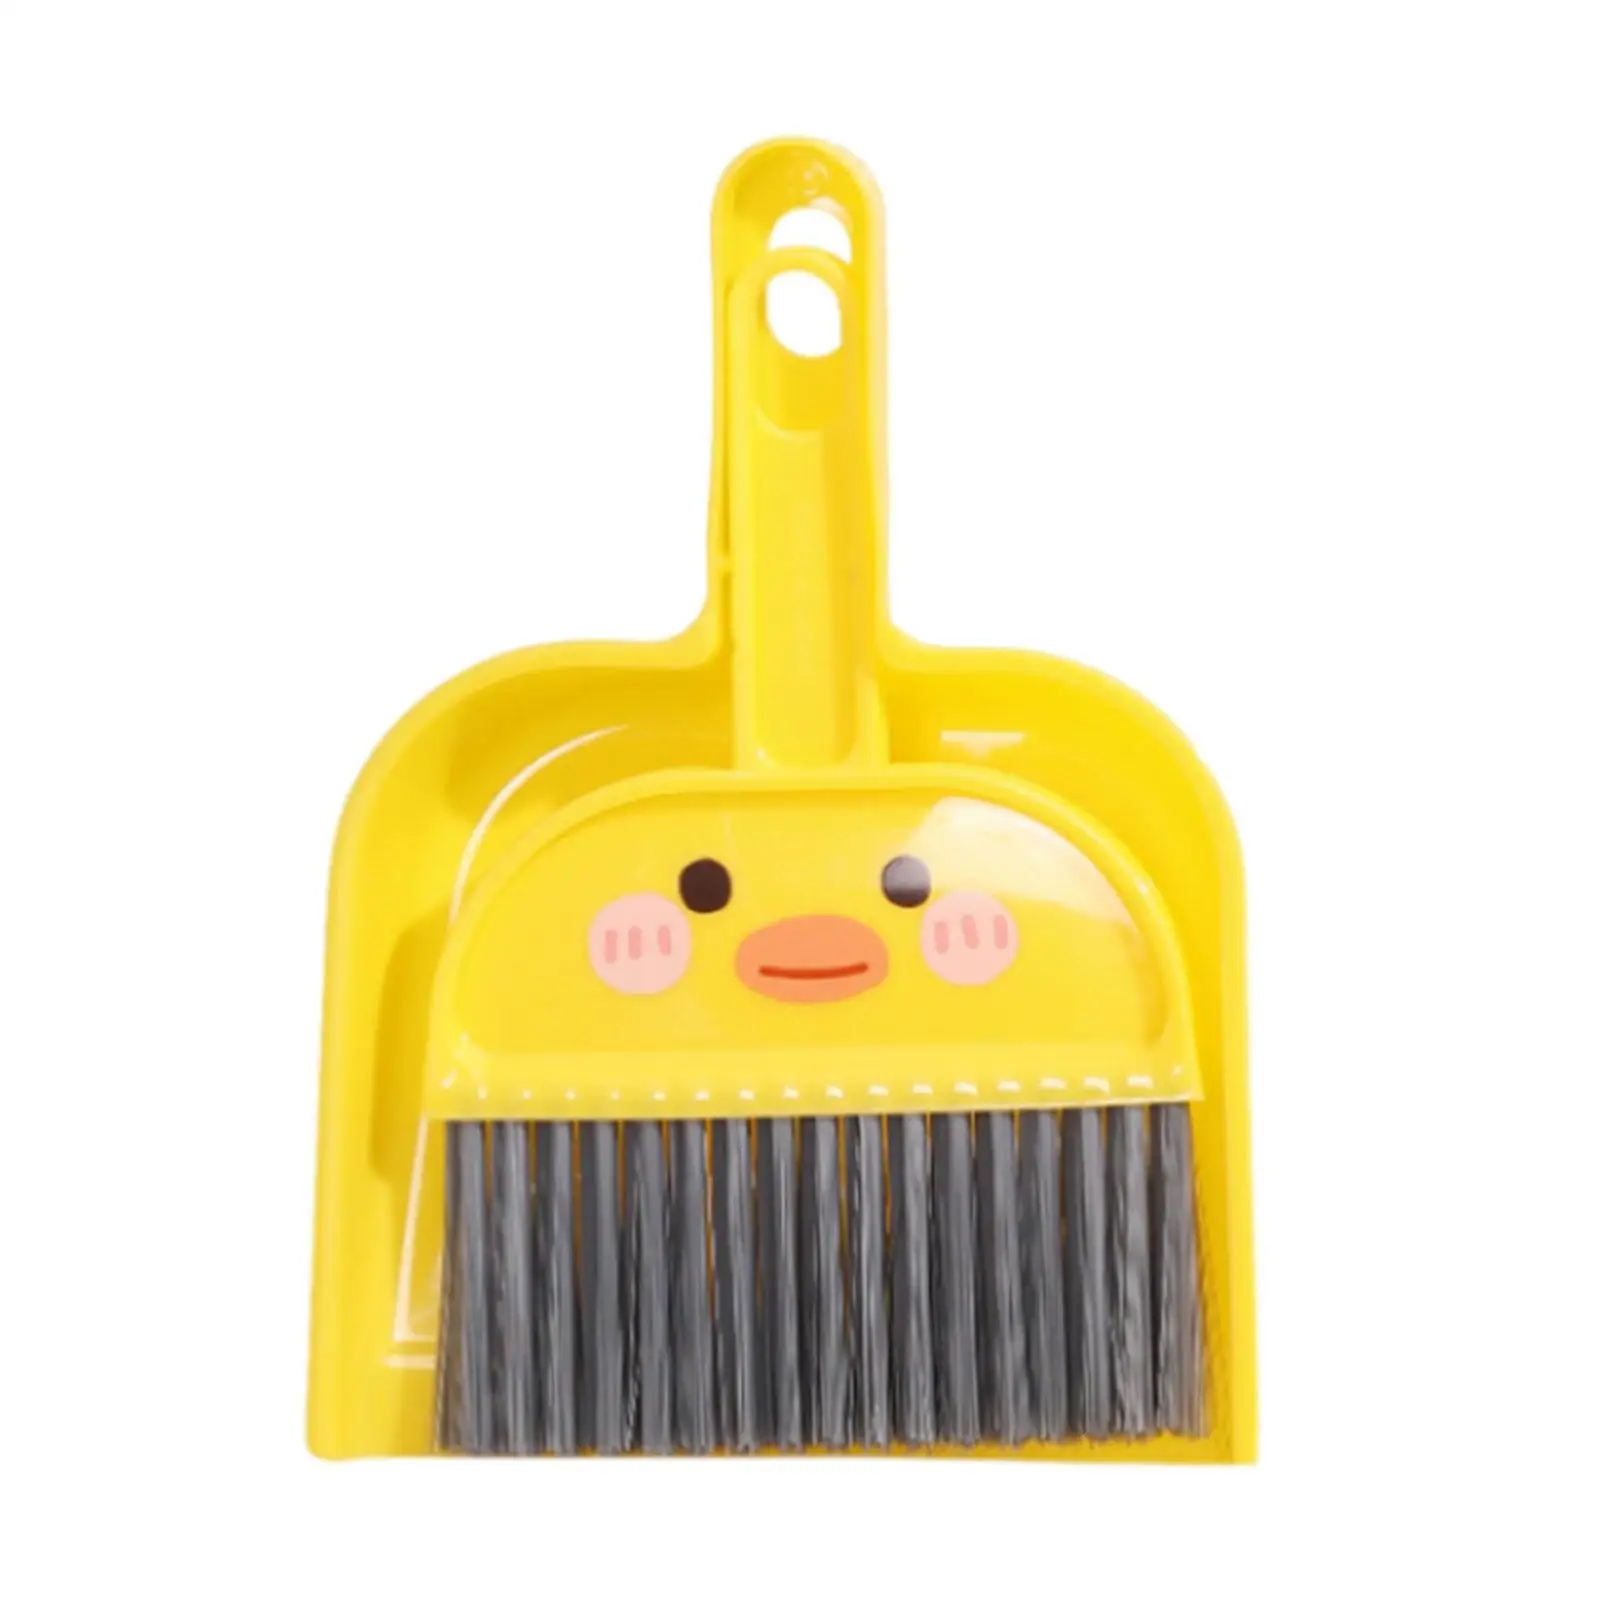 Mini Dustpan and Broom Set Kids Cleaning Set Housekeeping Hand Broom and Dust Pan for Desk Small Messes Keyboard Kitchen Table